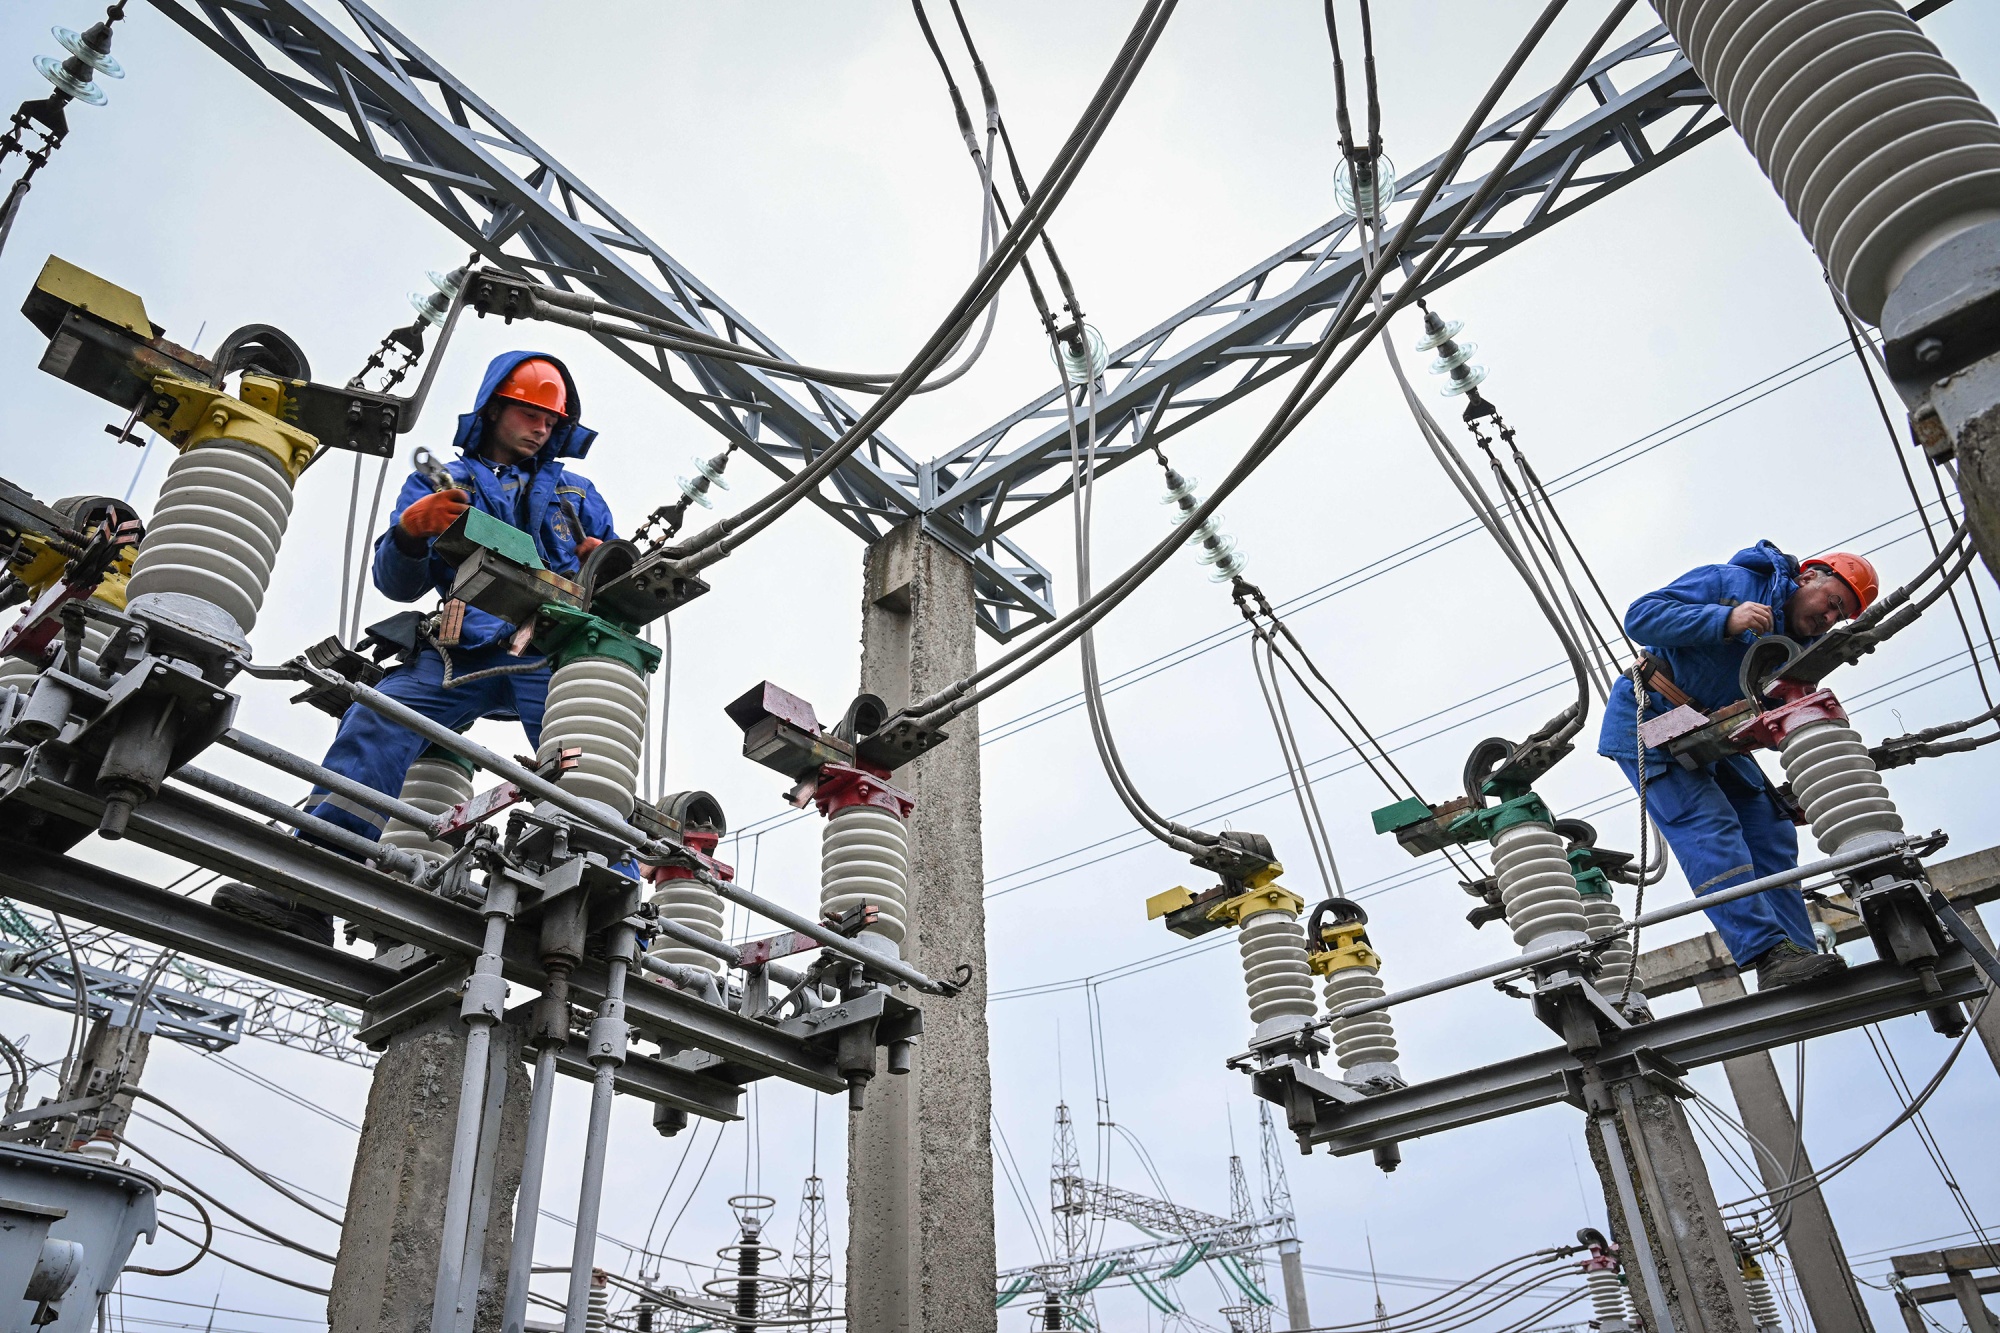 Electricians work on the maintenance of power lines at a power station near Balti, Moldova.